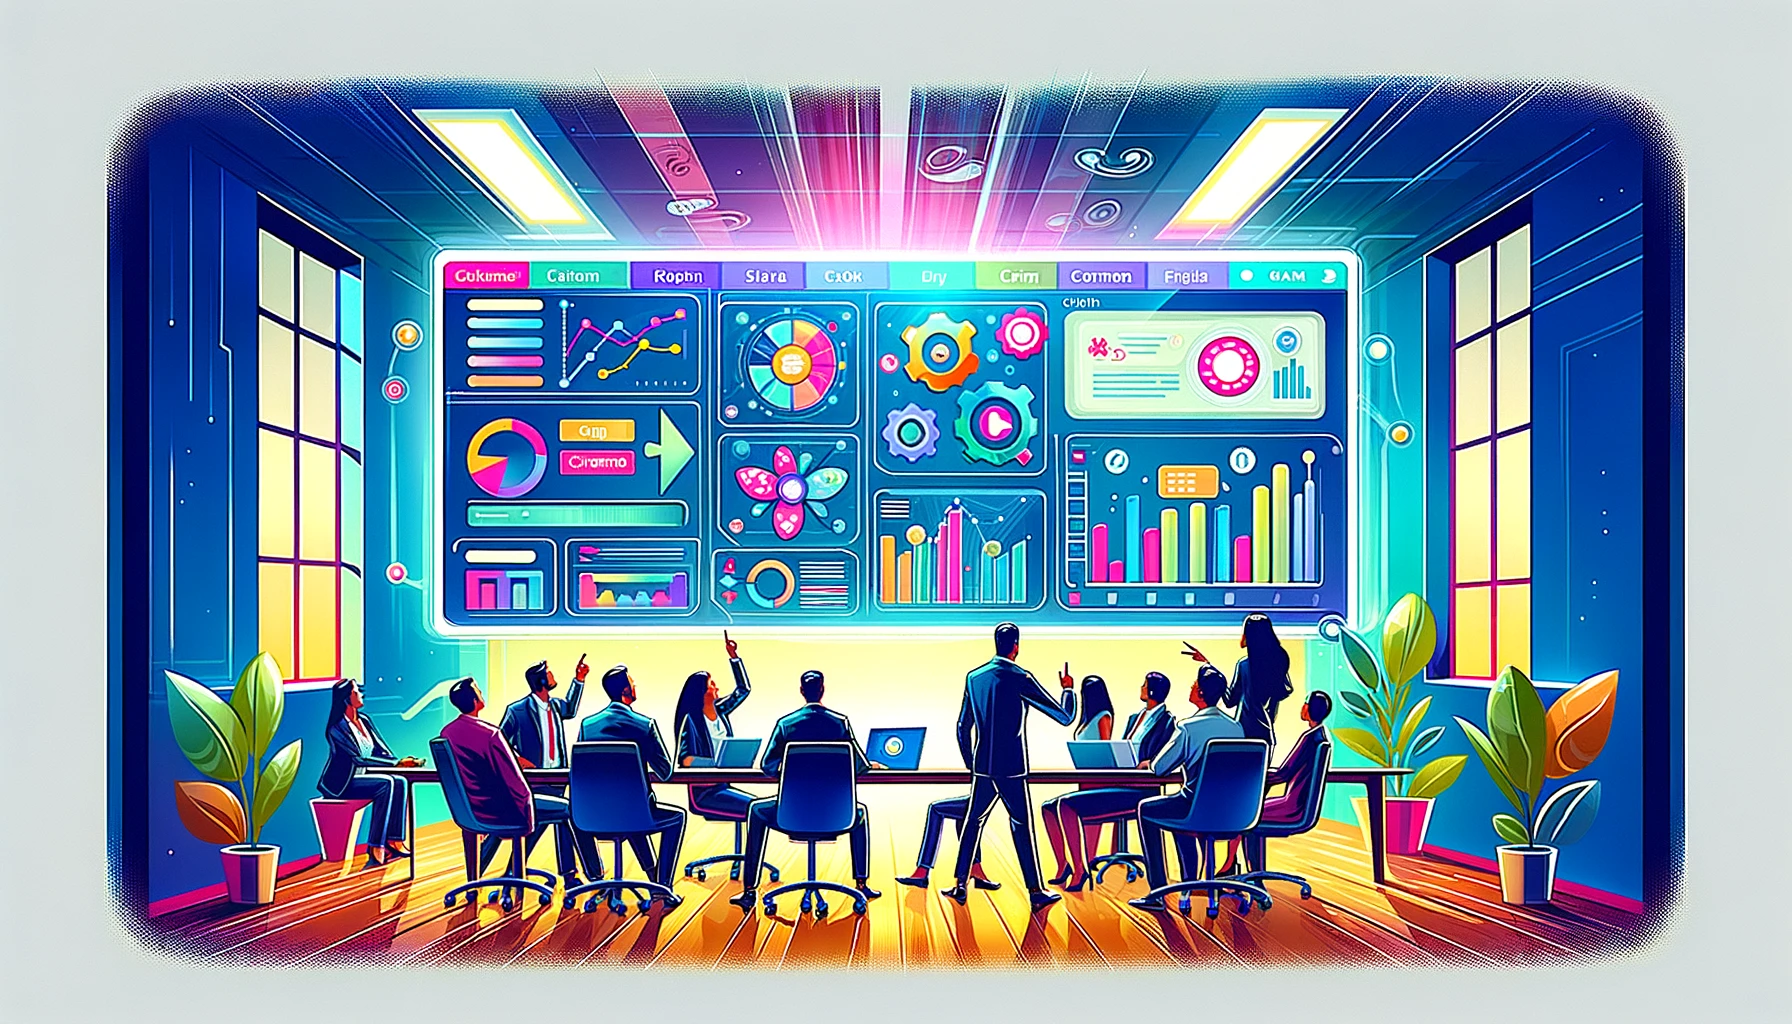 A colorful illustration of a vibrant office setting where a team is actively engaging around a high-tech digital display. The display shows a CRM system dashboard with various customer data points and analytics. Team members are shown discussing and pointing at the screen, highlighting collaboration and strategic planning. The modern and slightly abstract style underscores the importance of technology in managing customer relationships and driving loyalty.